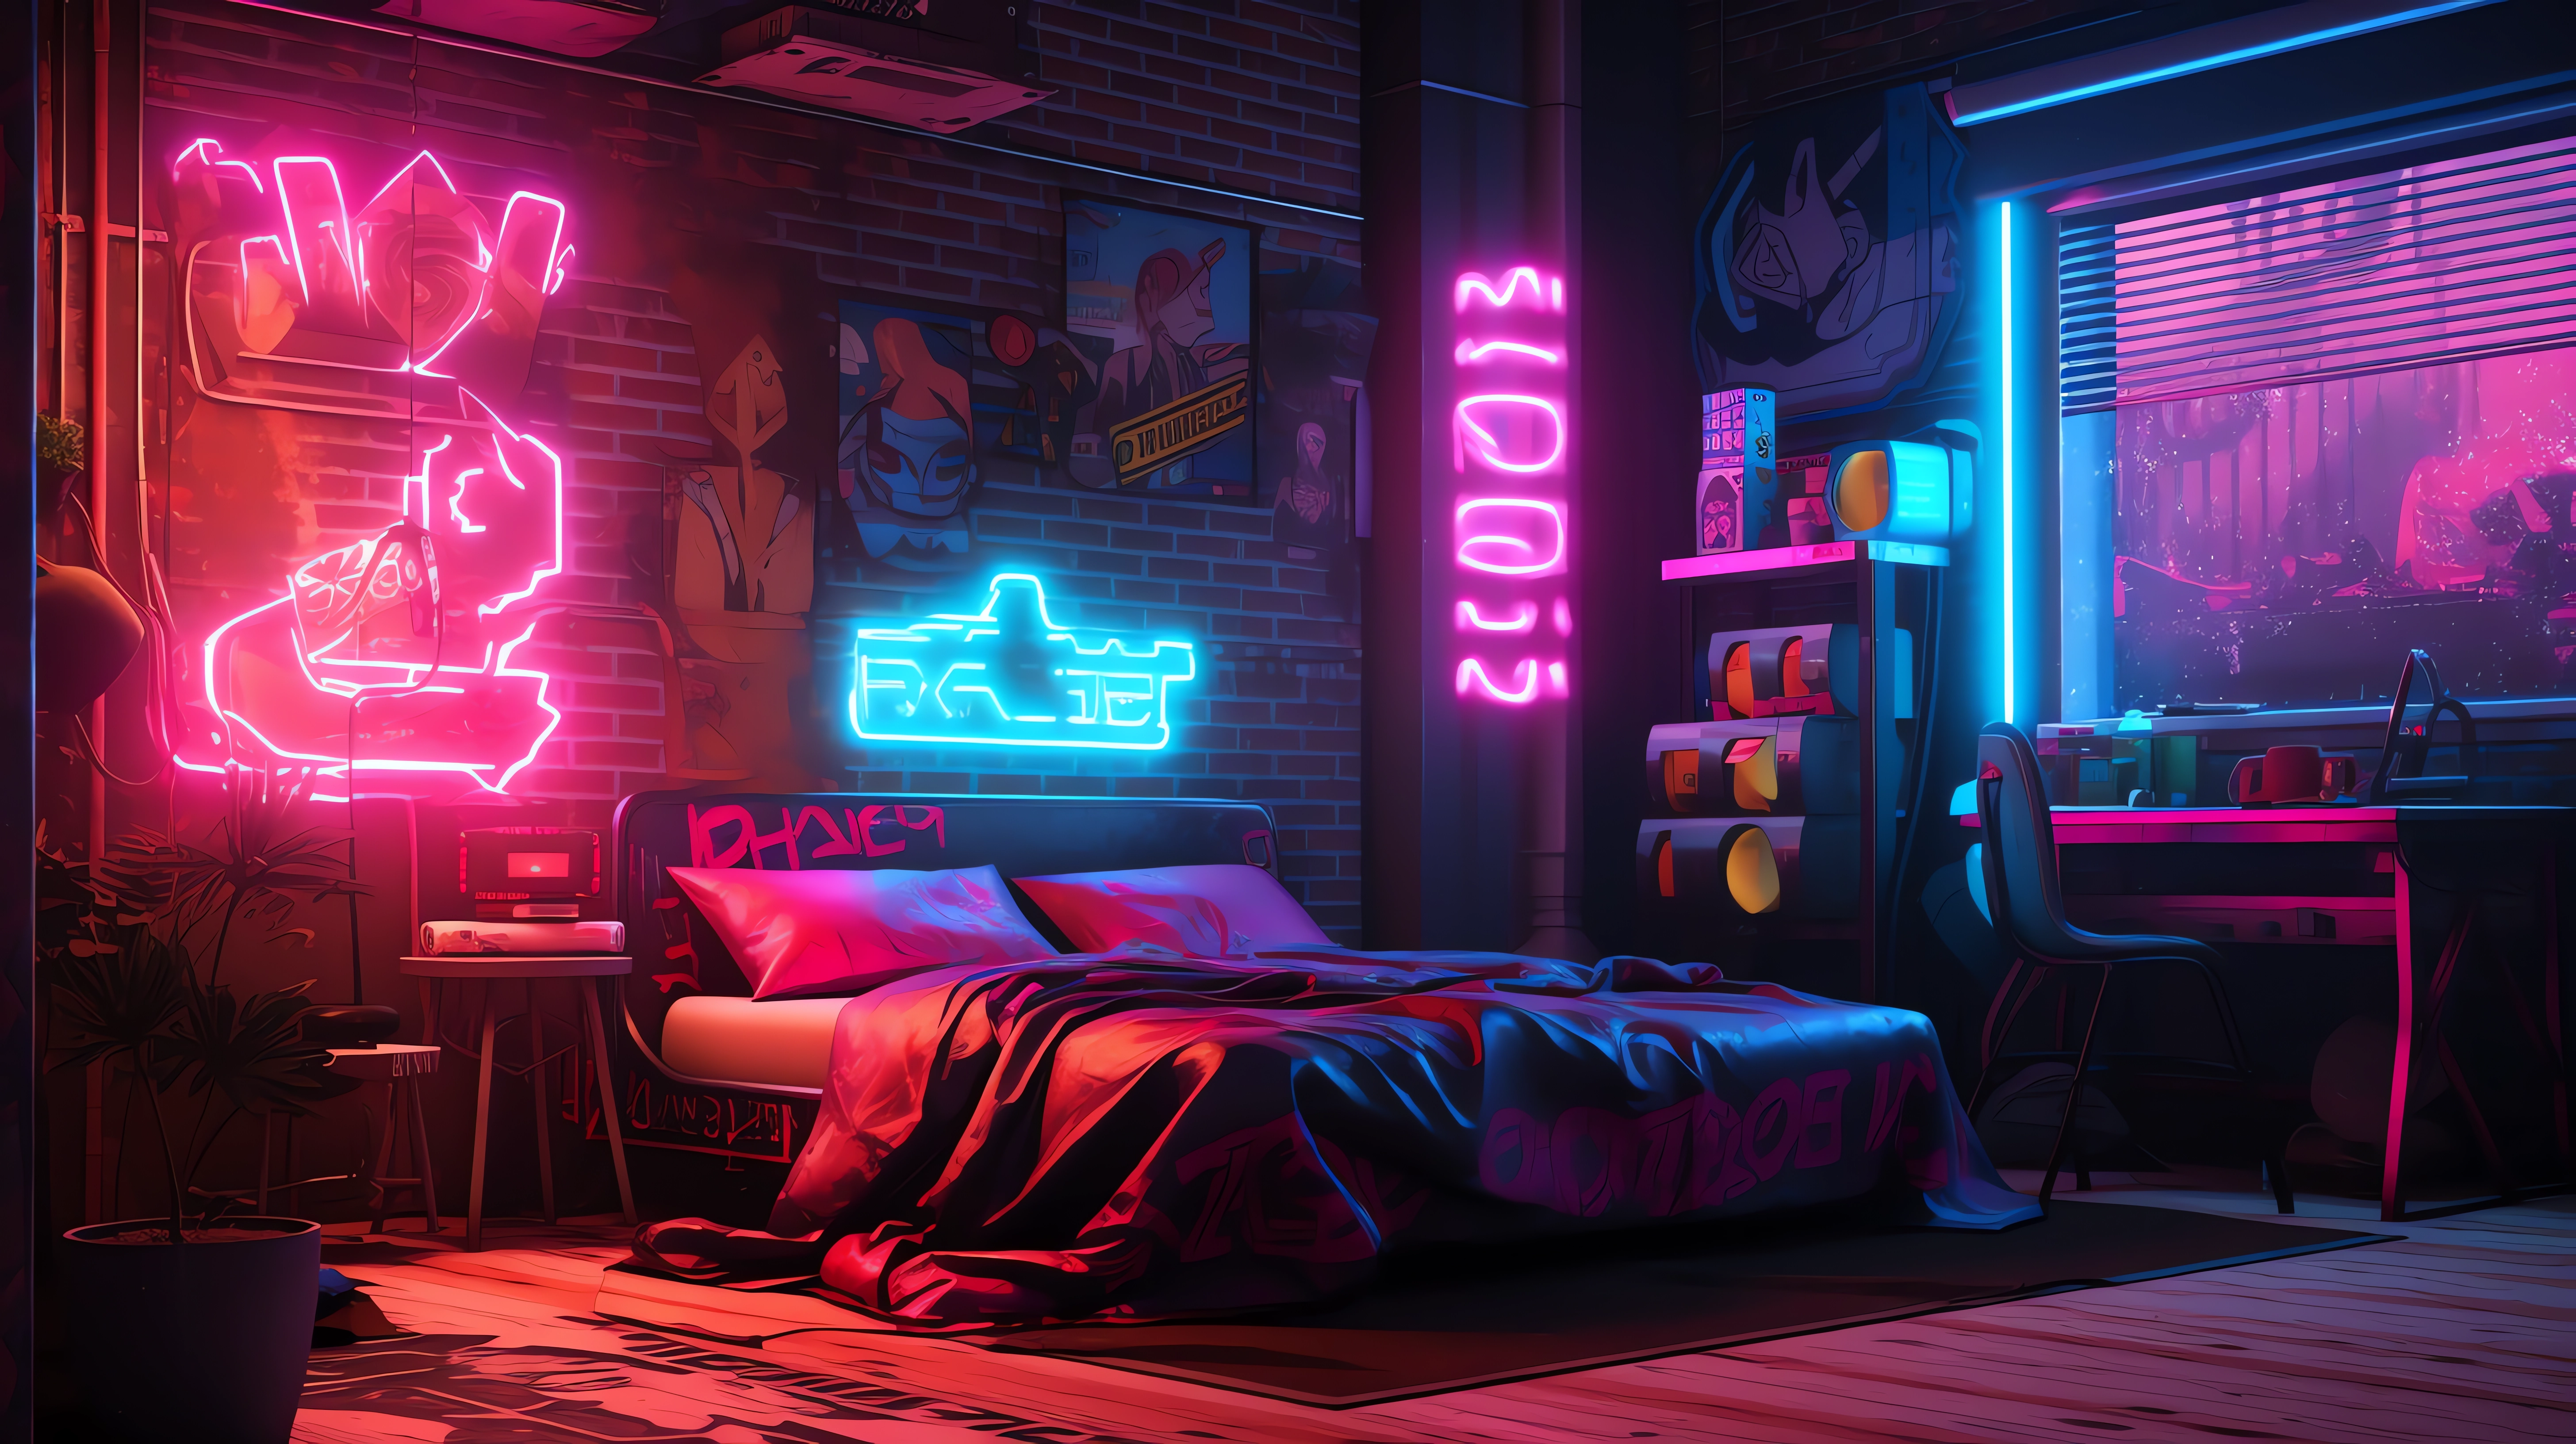 Bedroom into a Cyberpunk Haven